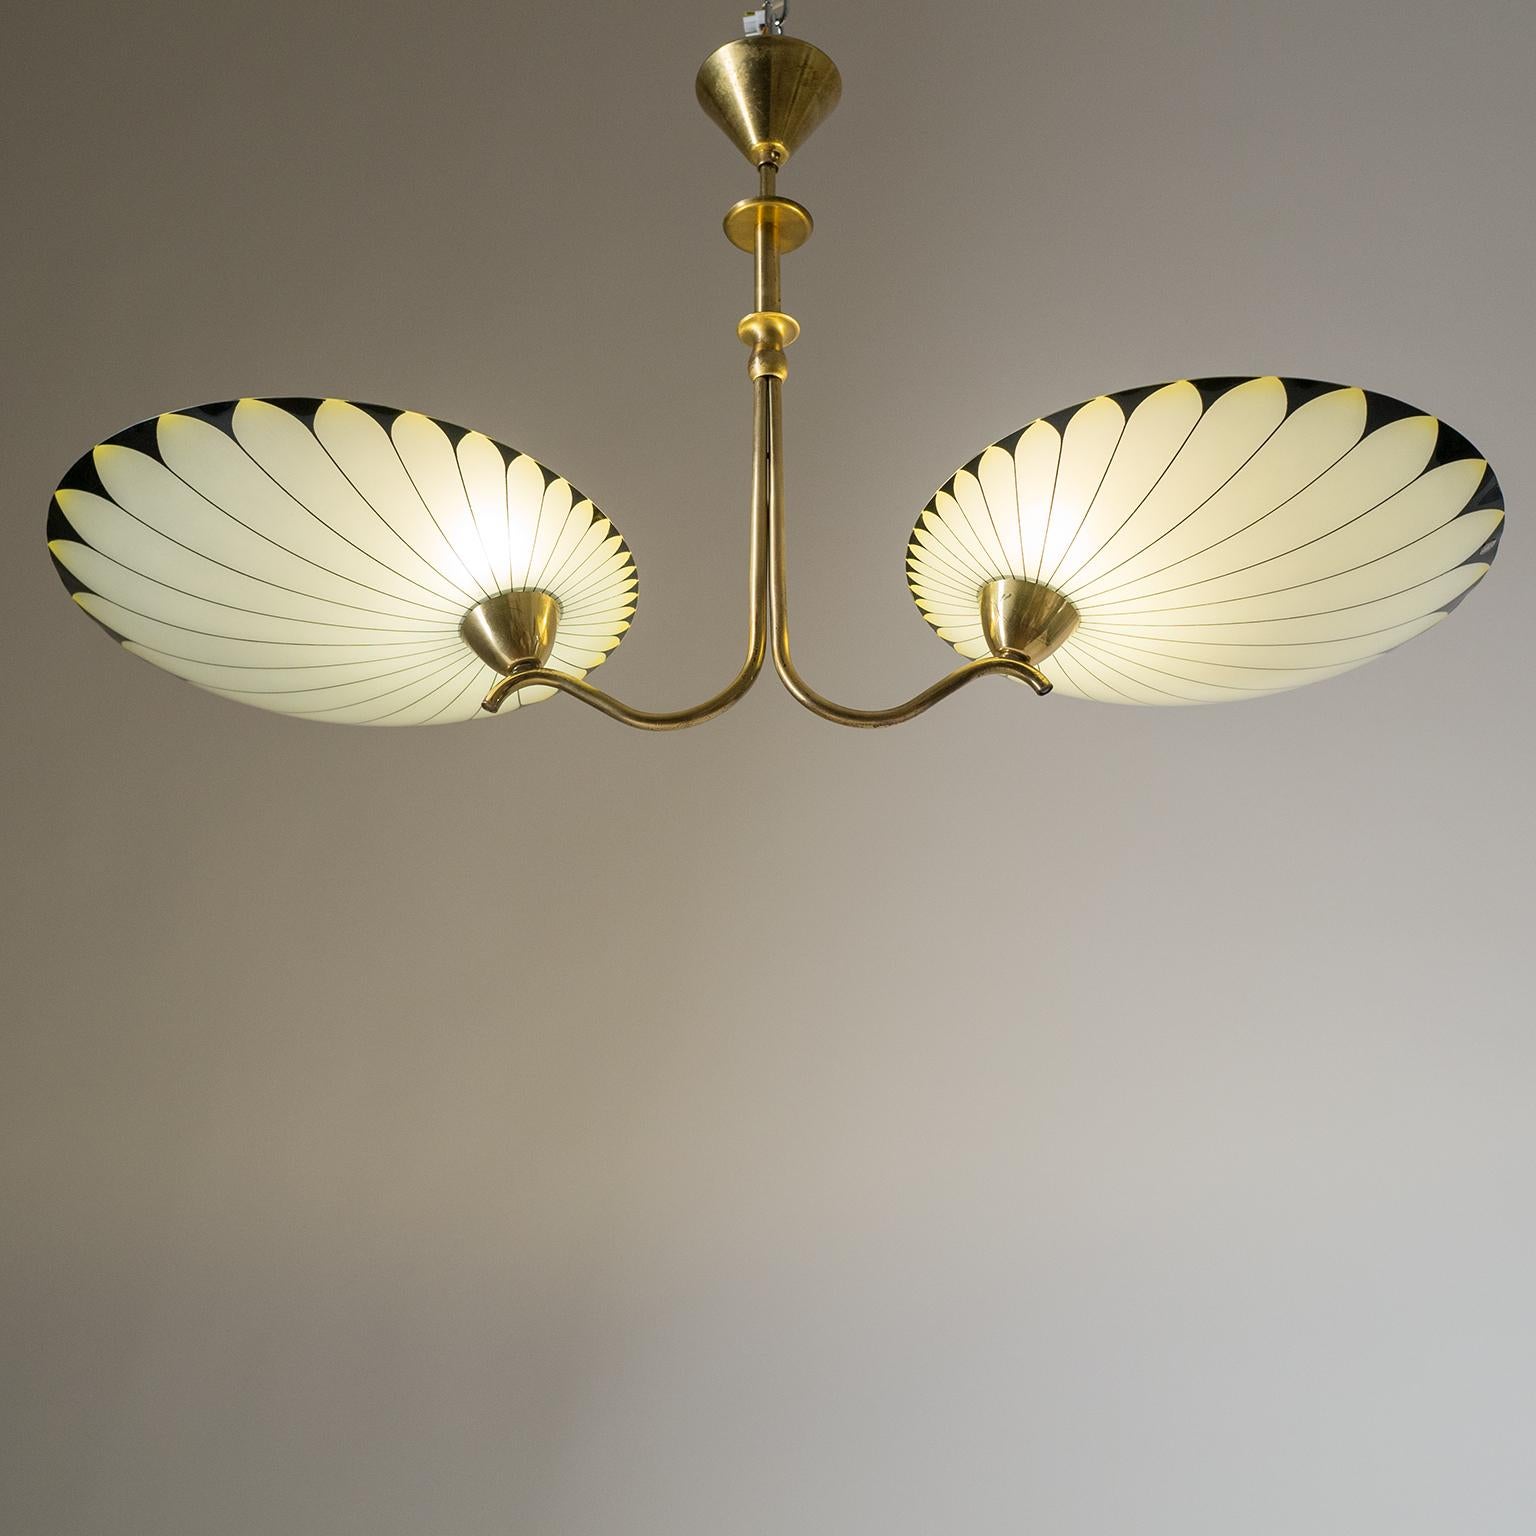 Art Deco Chandelier, 1940s, Enameled Glass and Brass 8